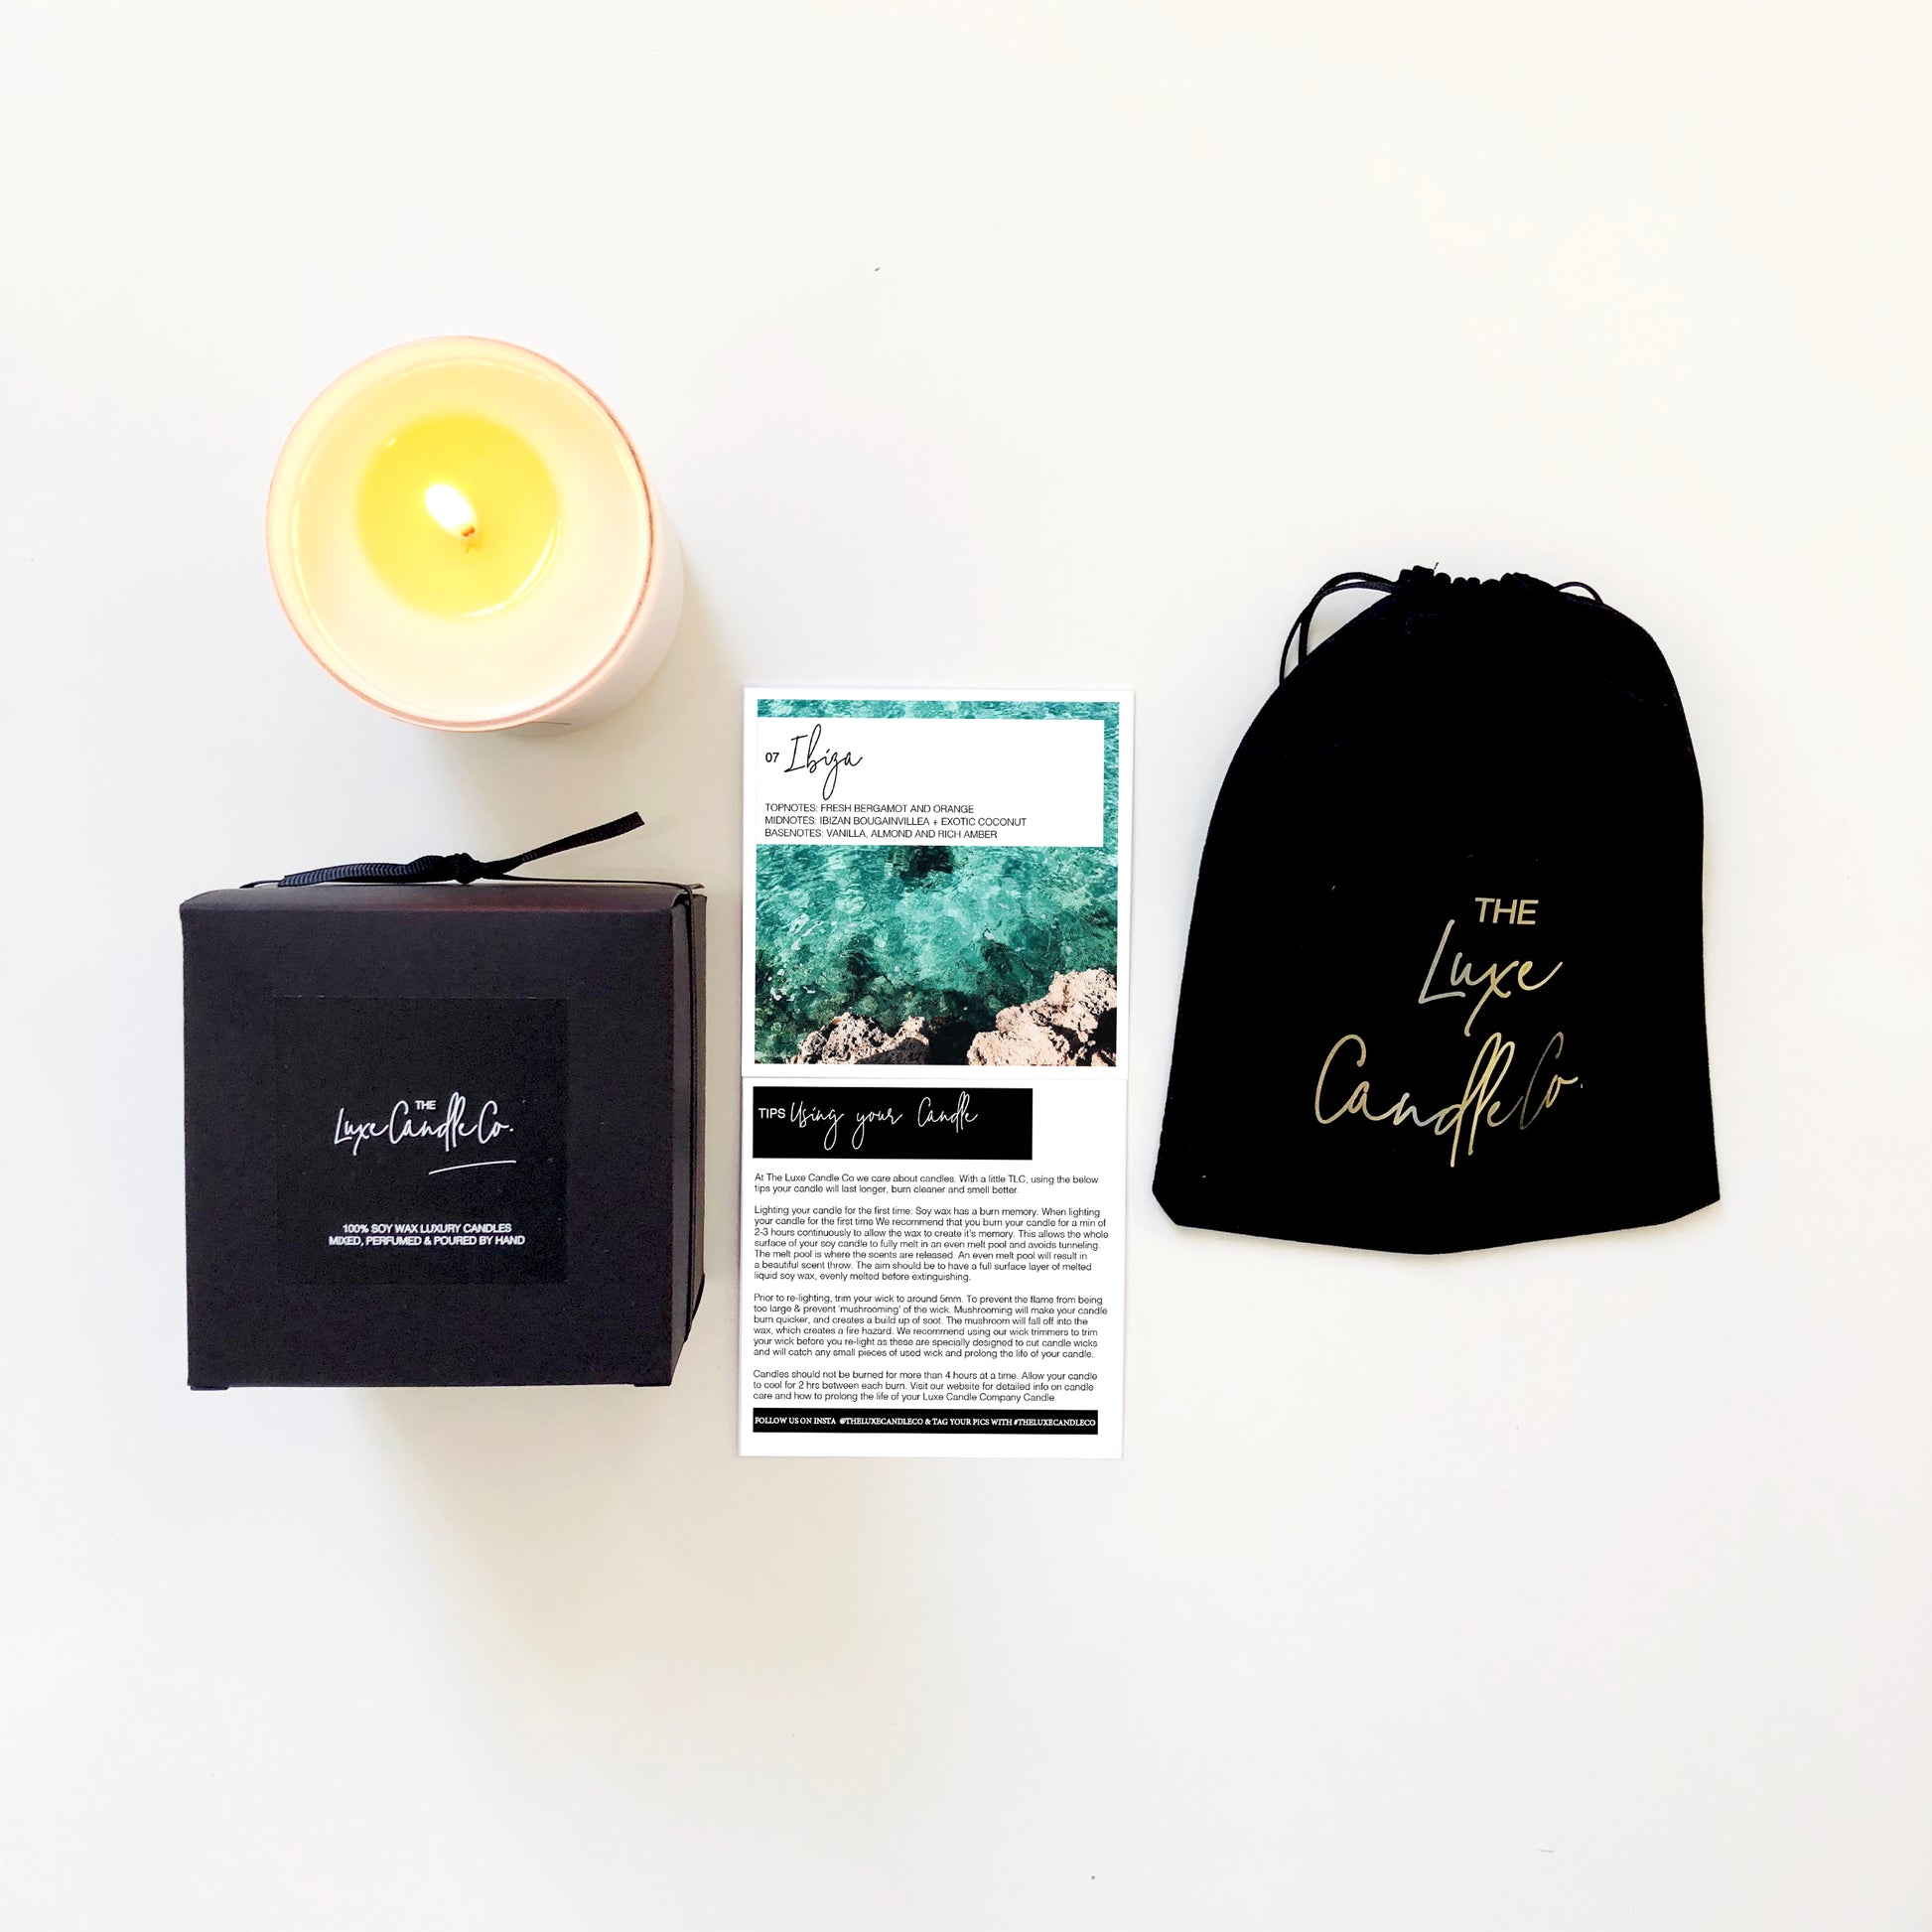 Beautifully packaged Ibiza holiday scented candle